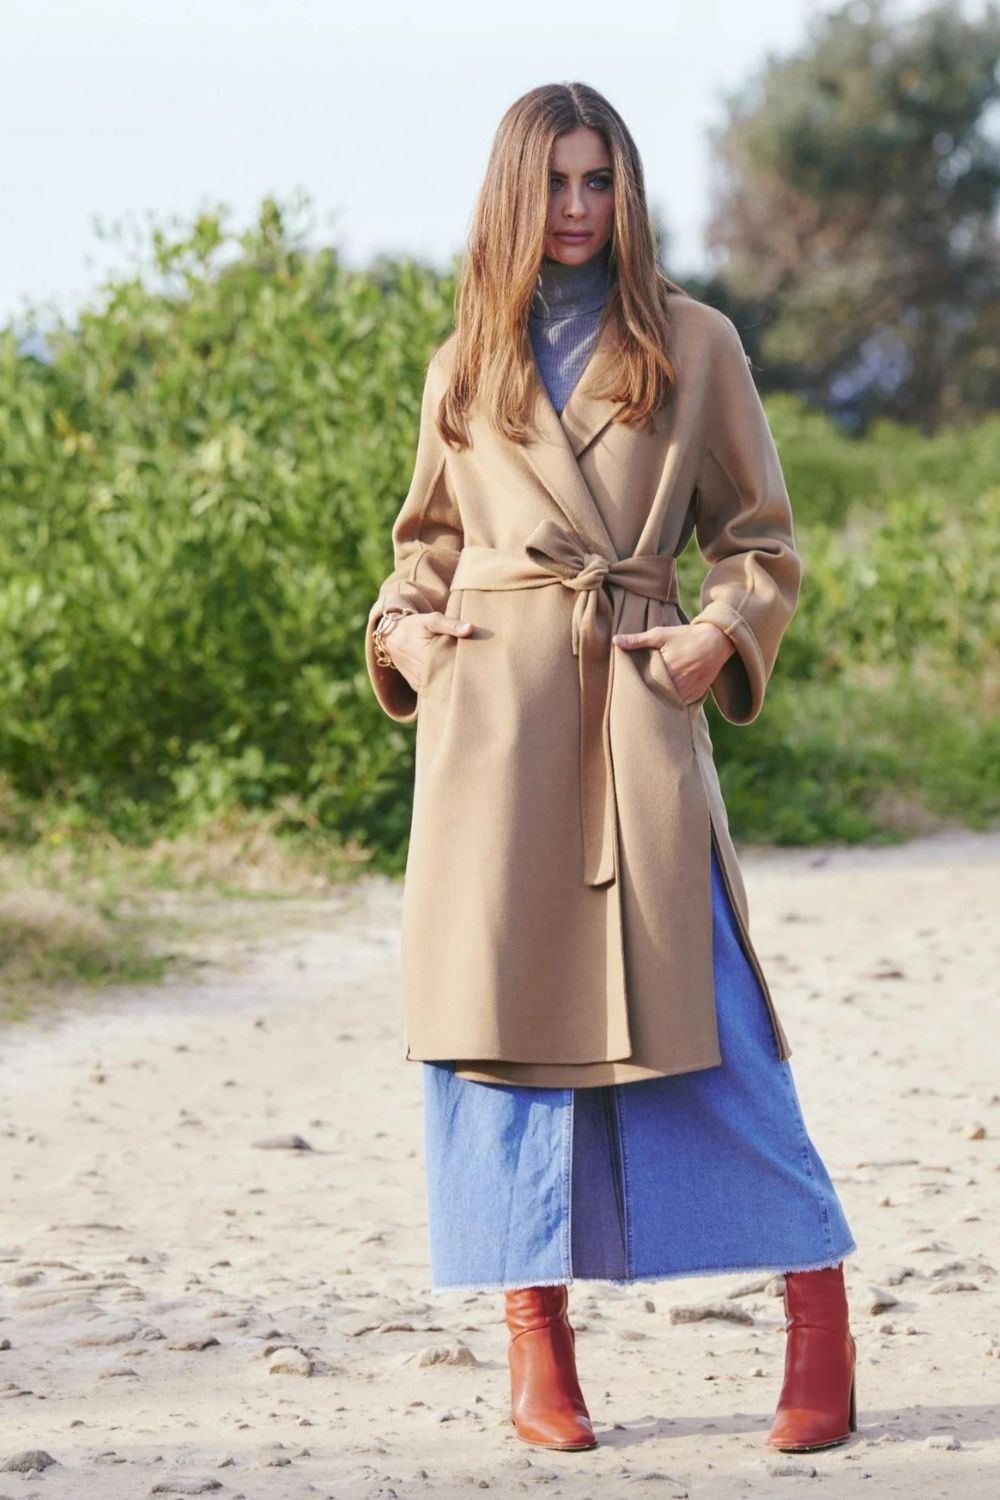 Birds Of A Feather | Nora Wool Coat | Camel